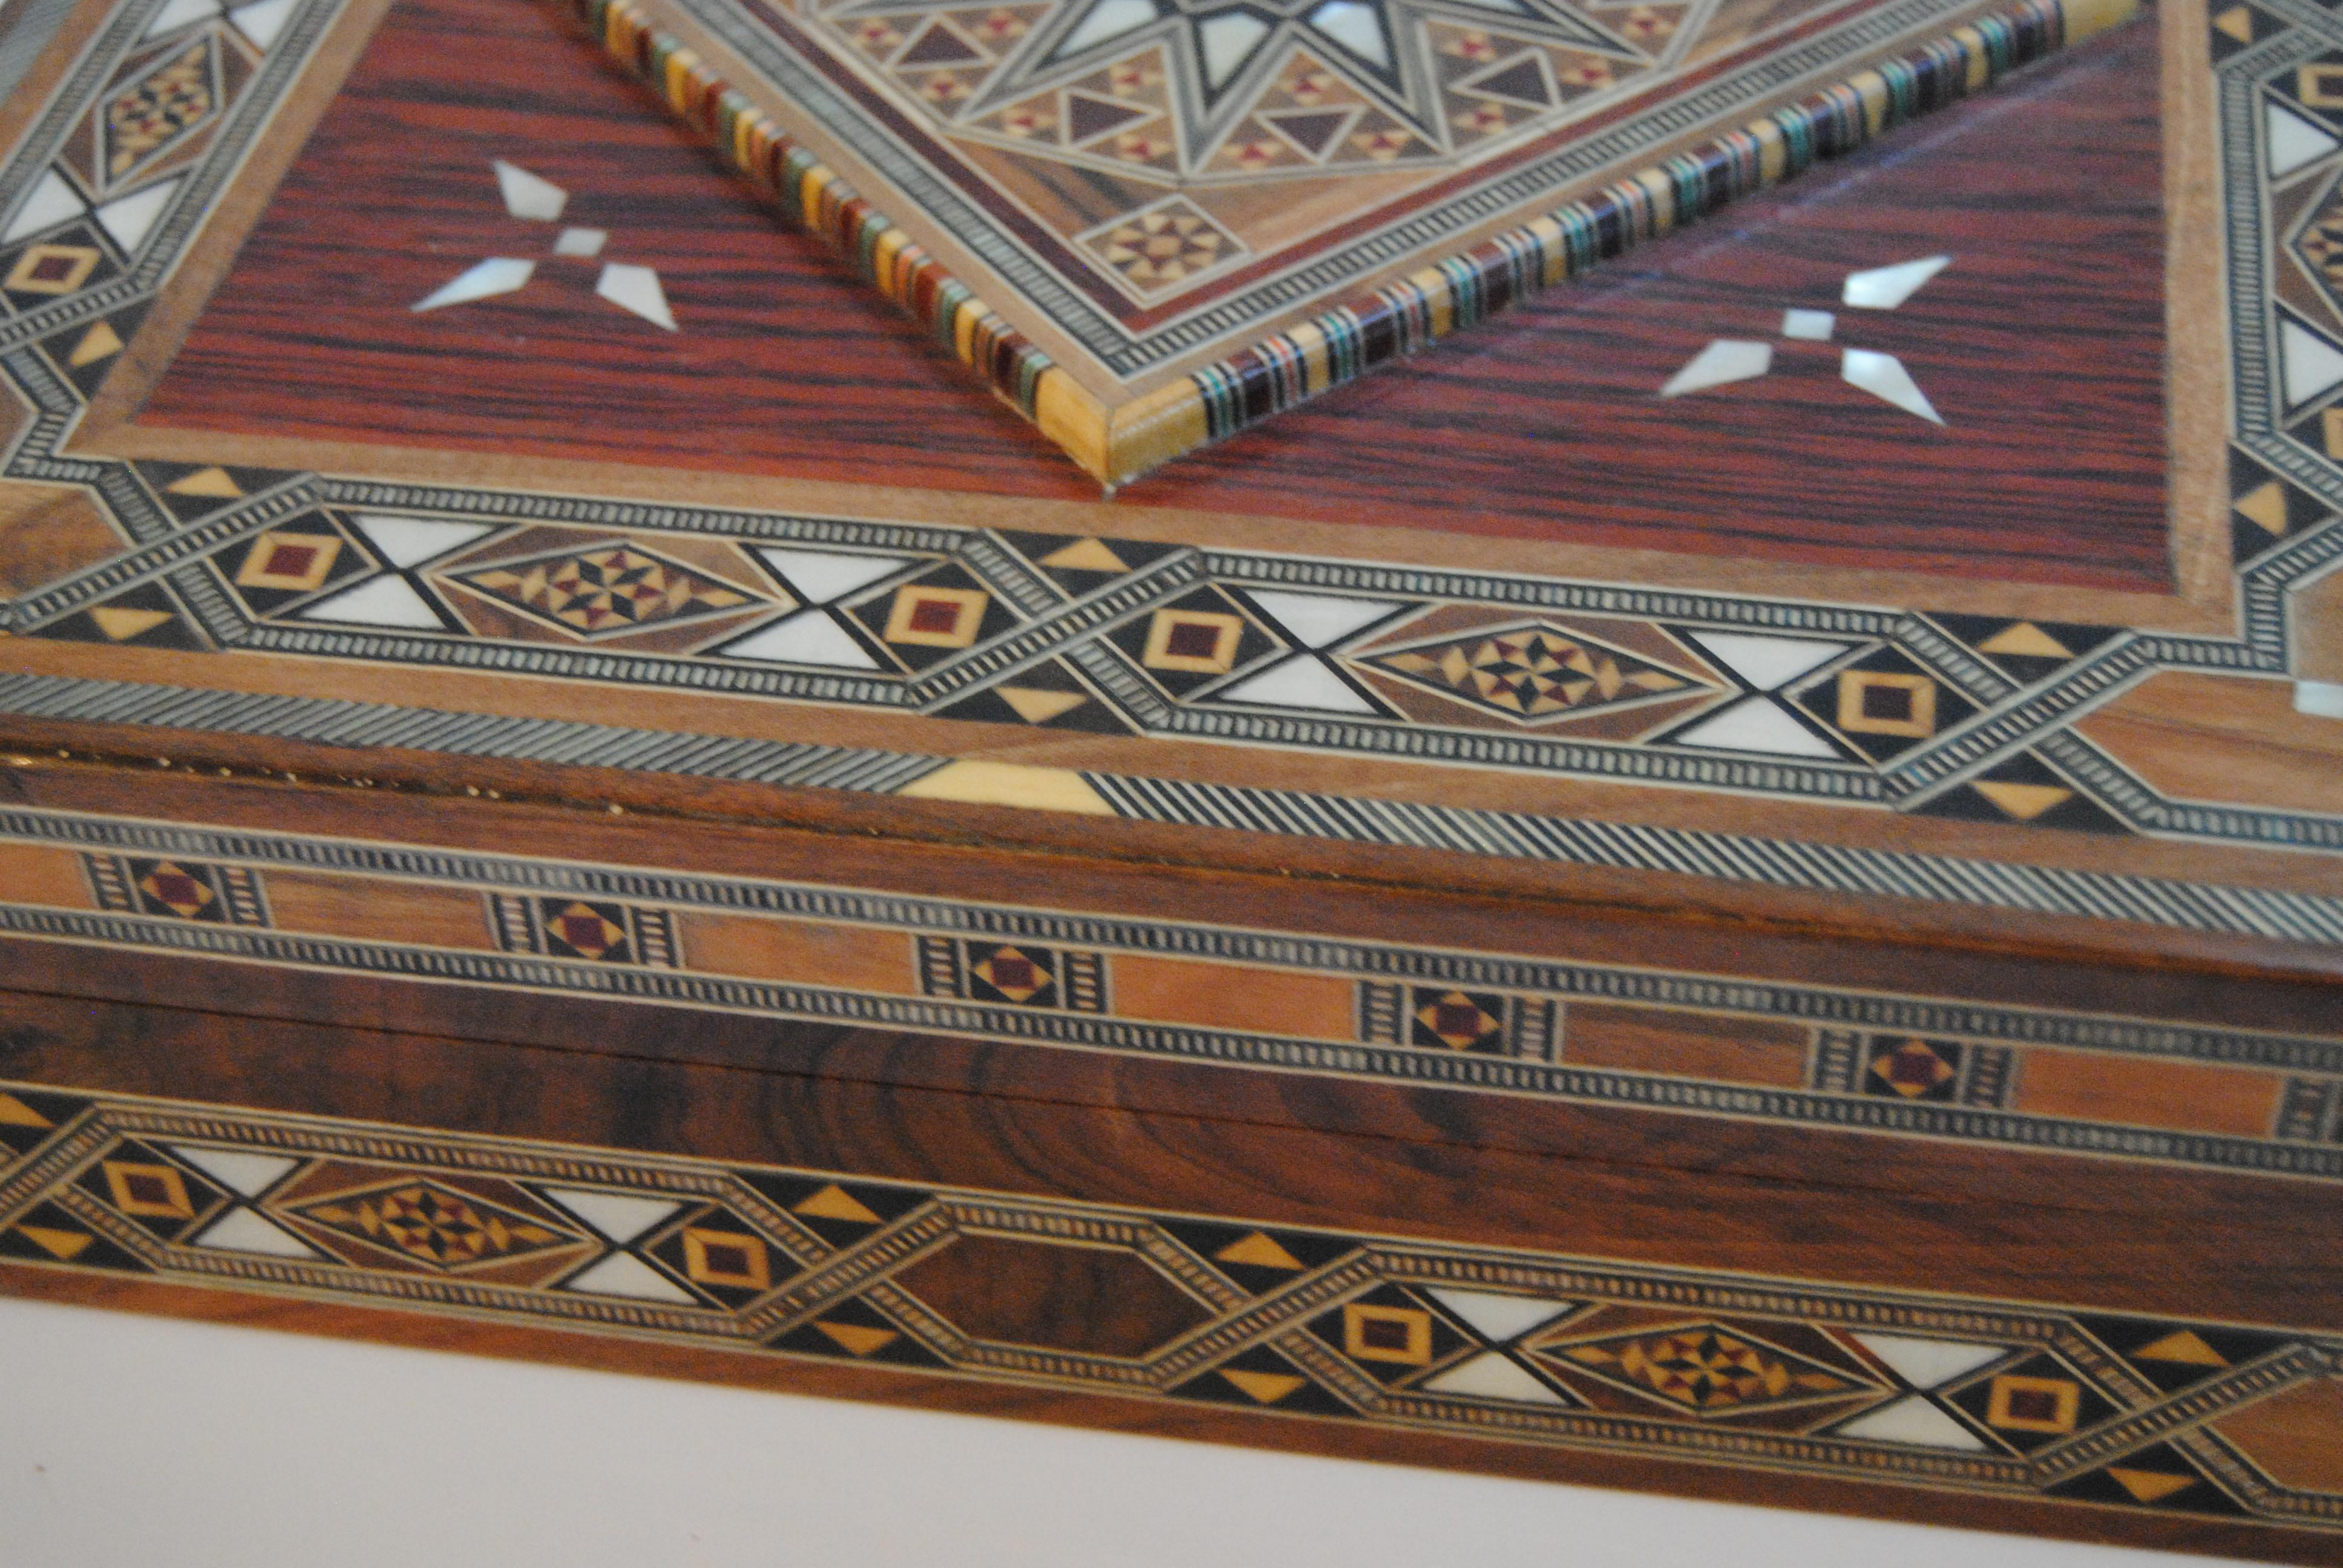 Syrian Walnut Wood Box Inlaid with Mother of Pearl and Cream Leather Lining In Excellent Condition For Sale In Glen Ellyn, IL